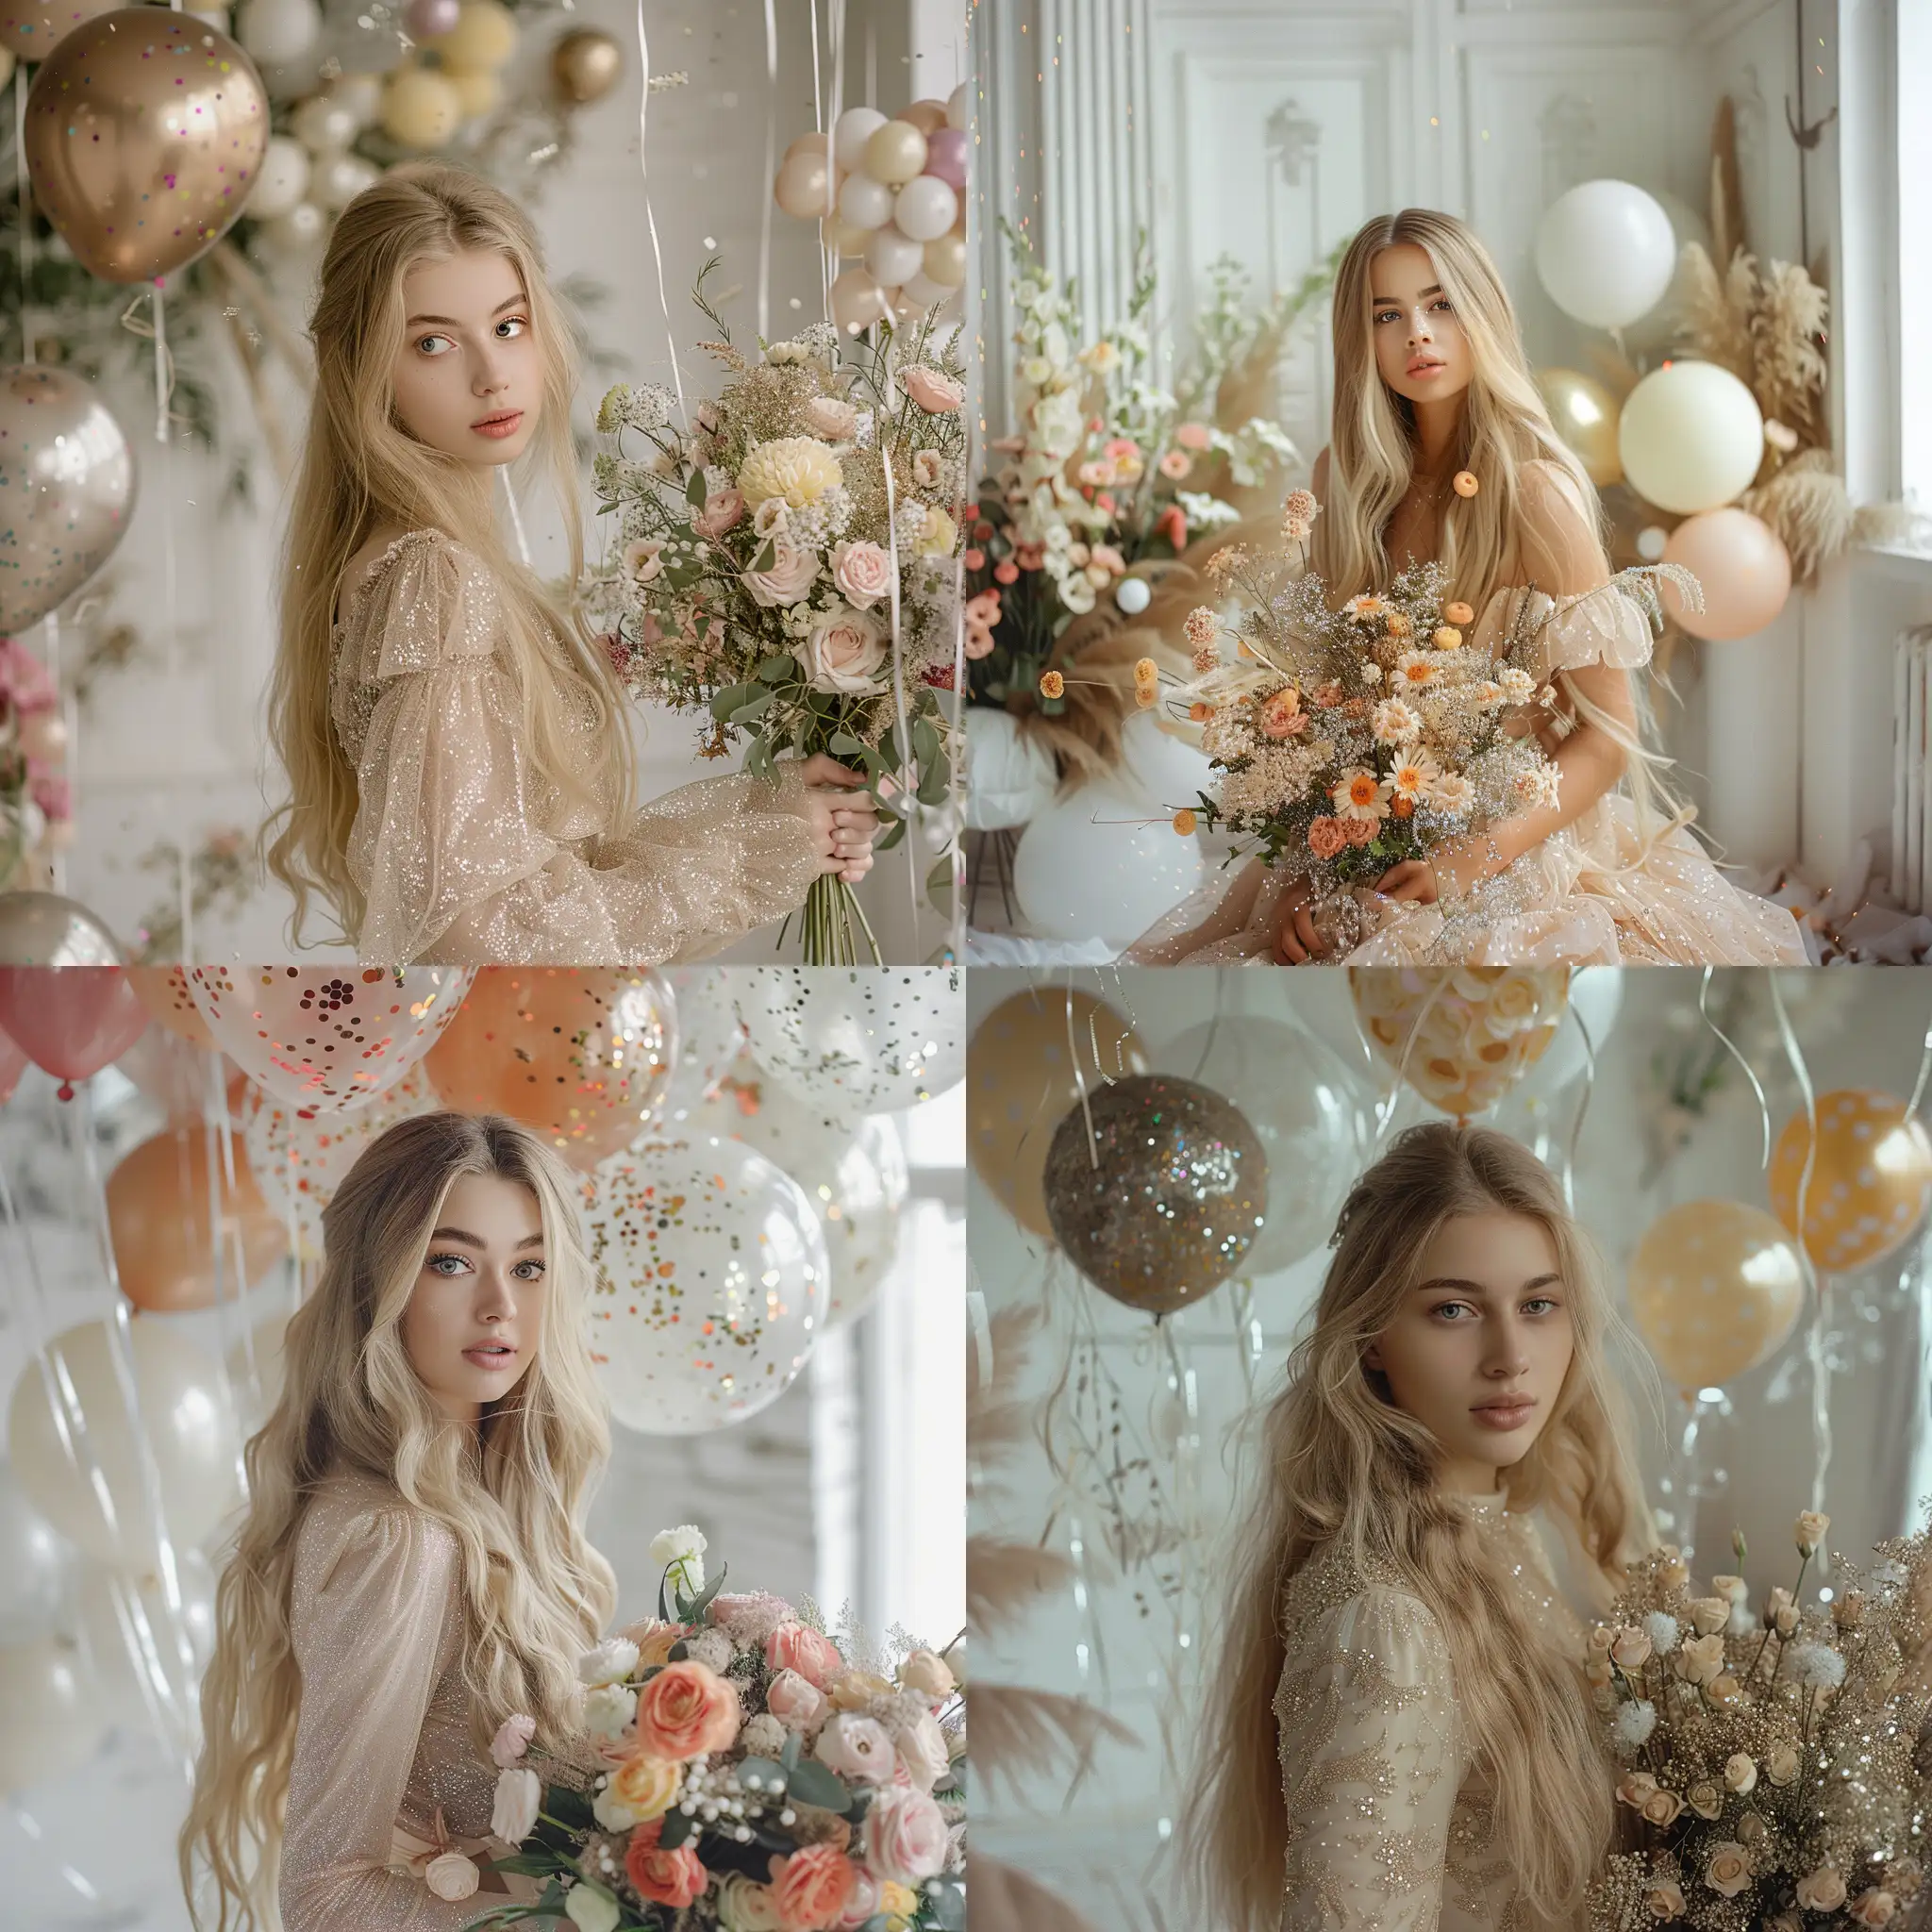 Blonde-Woman-with-Bouquet-of-Flowers-in-Glittery-Studio-Setting